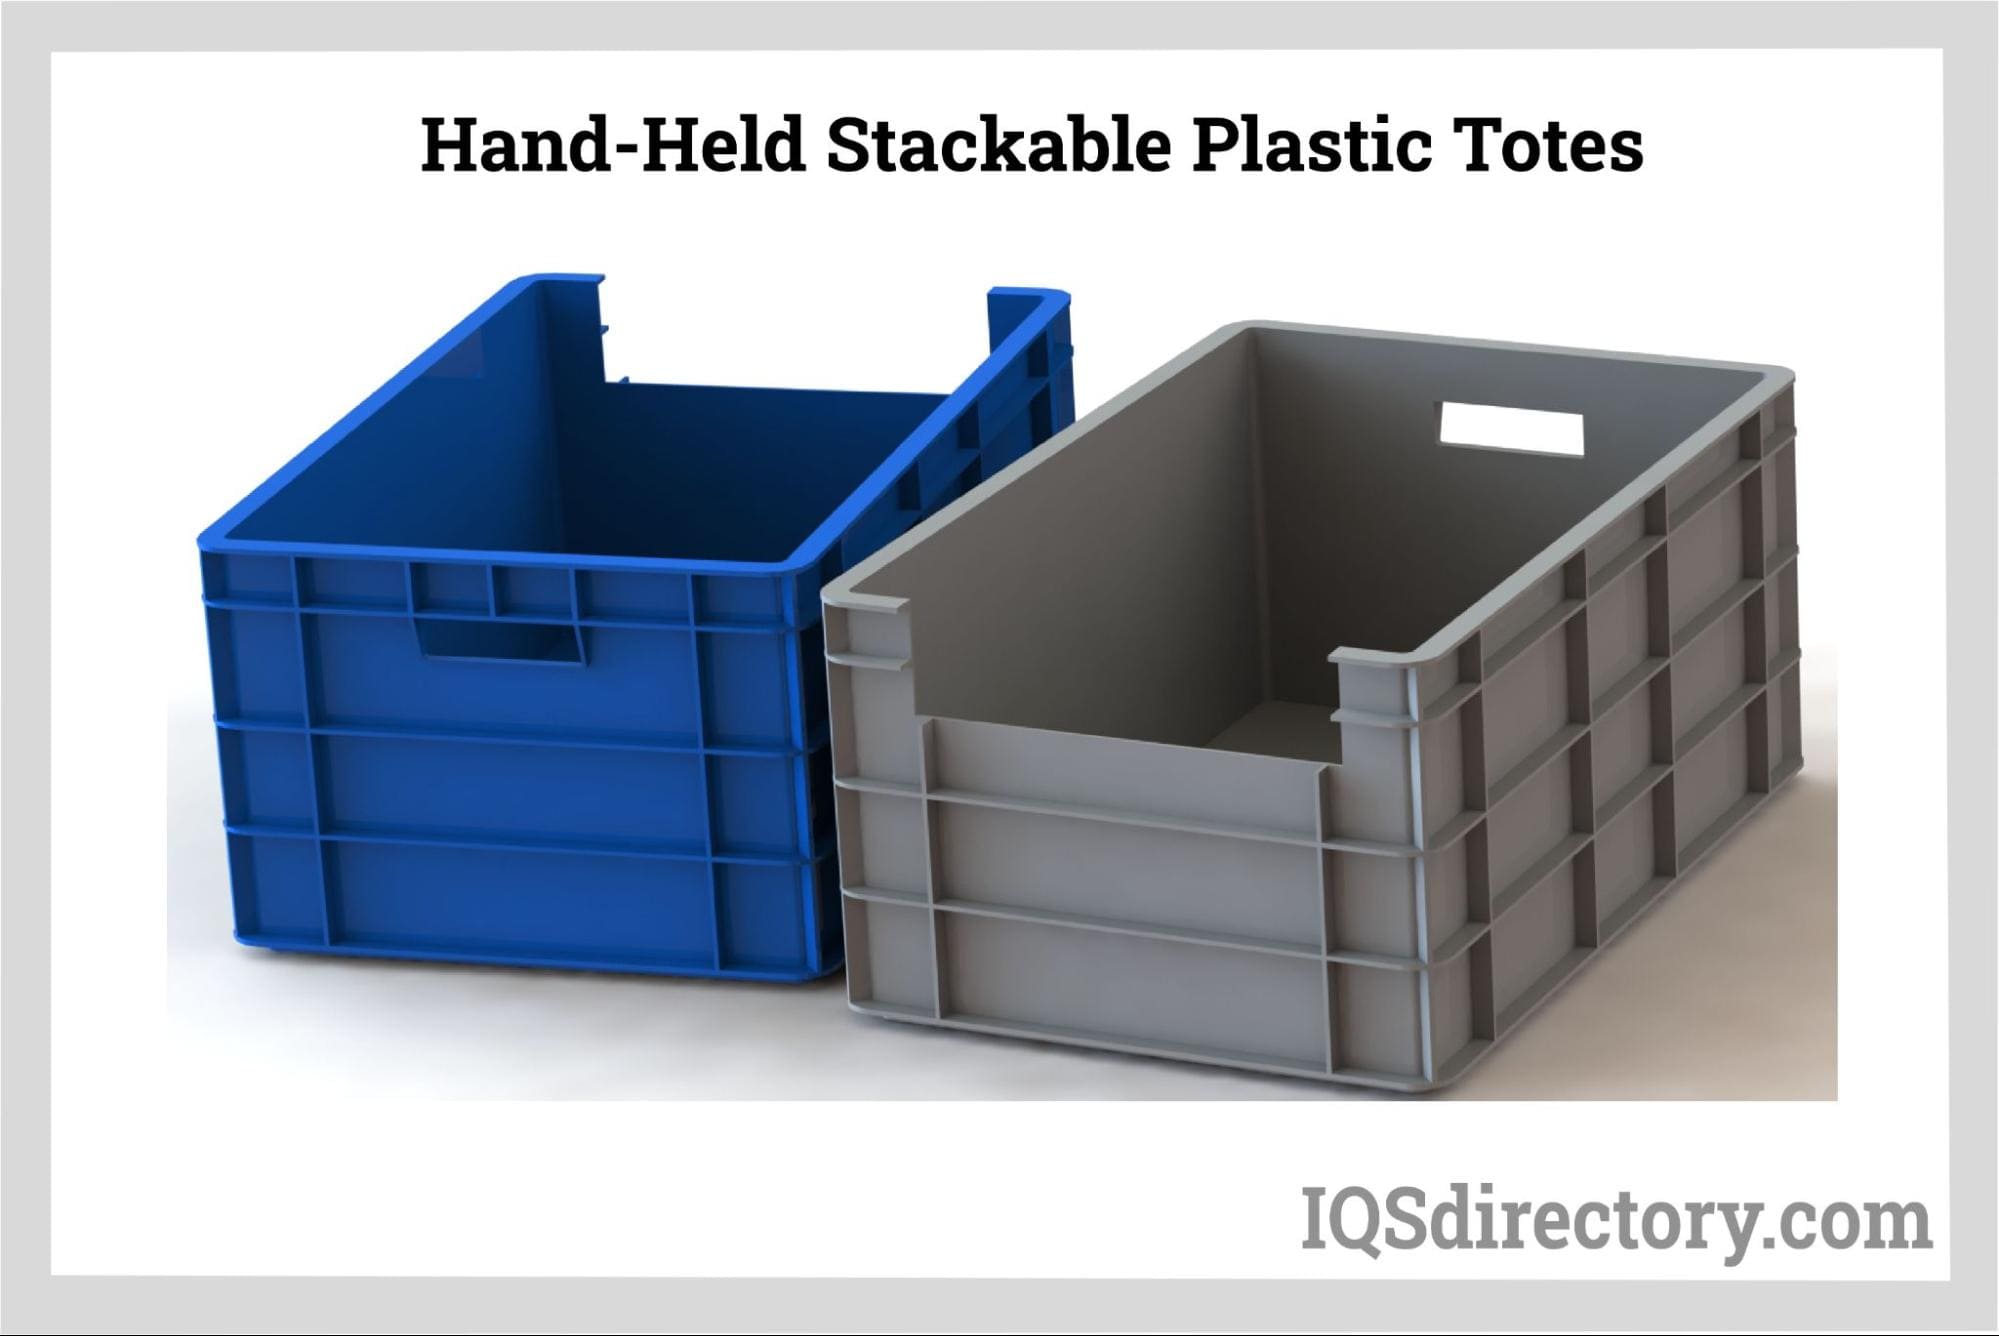 https://www.plastic-containers.net/wp-content/uploads/2023/02/hand-held-stackable-plastic-totes.jpg